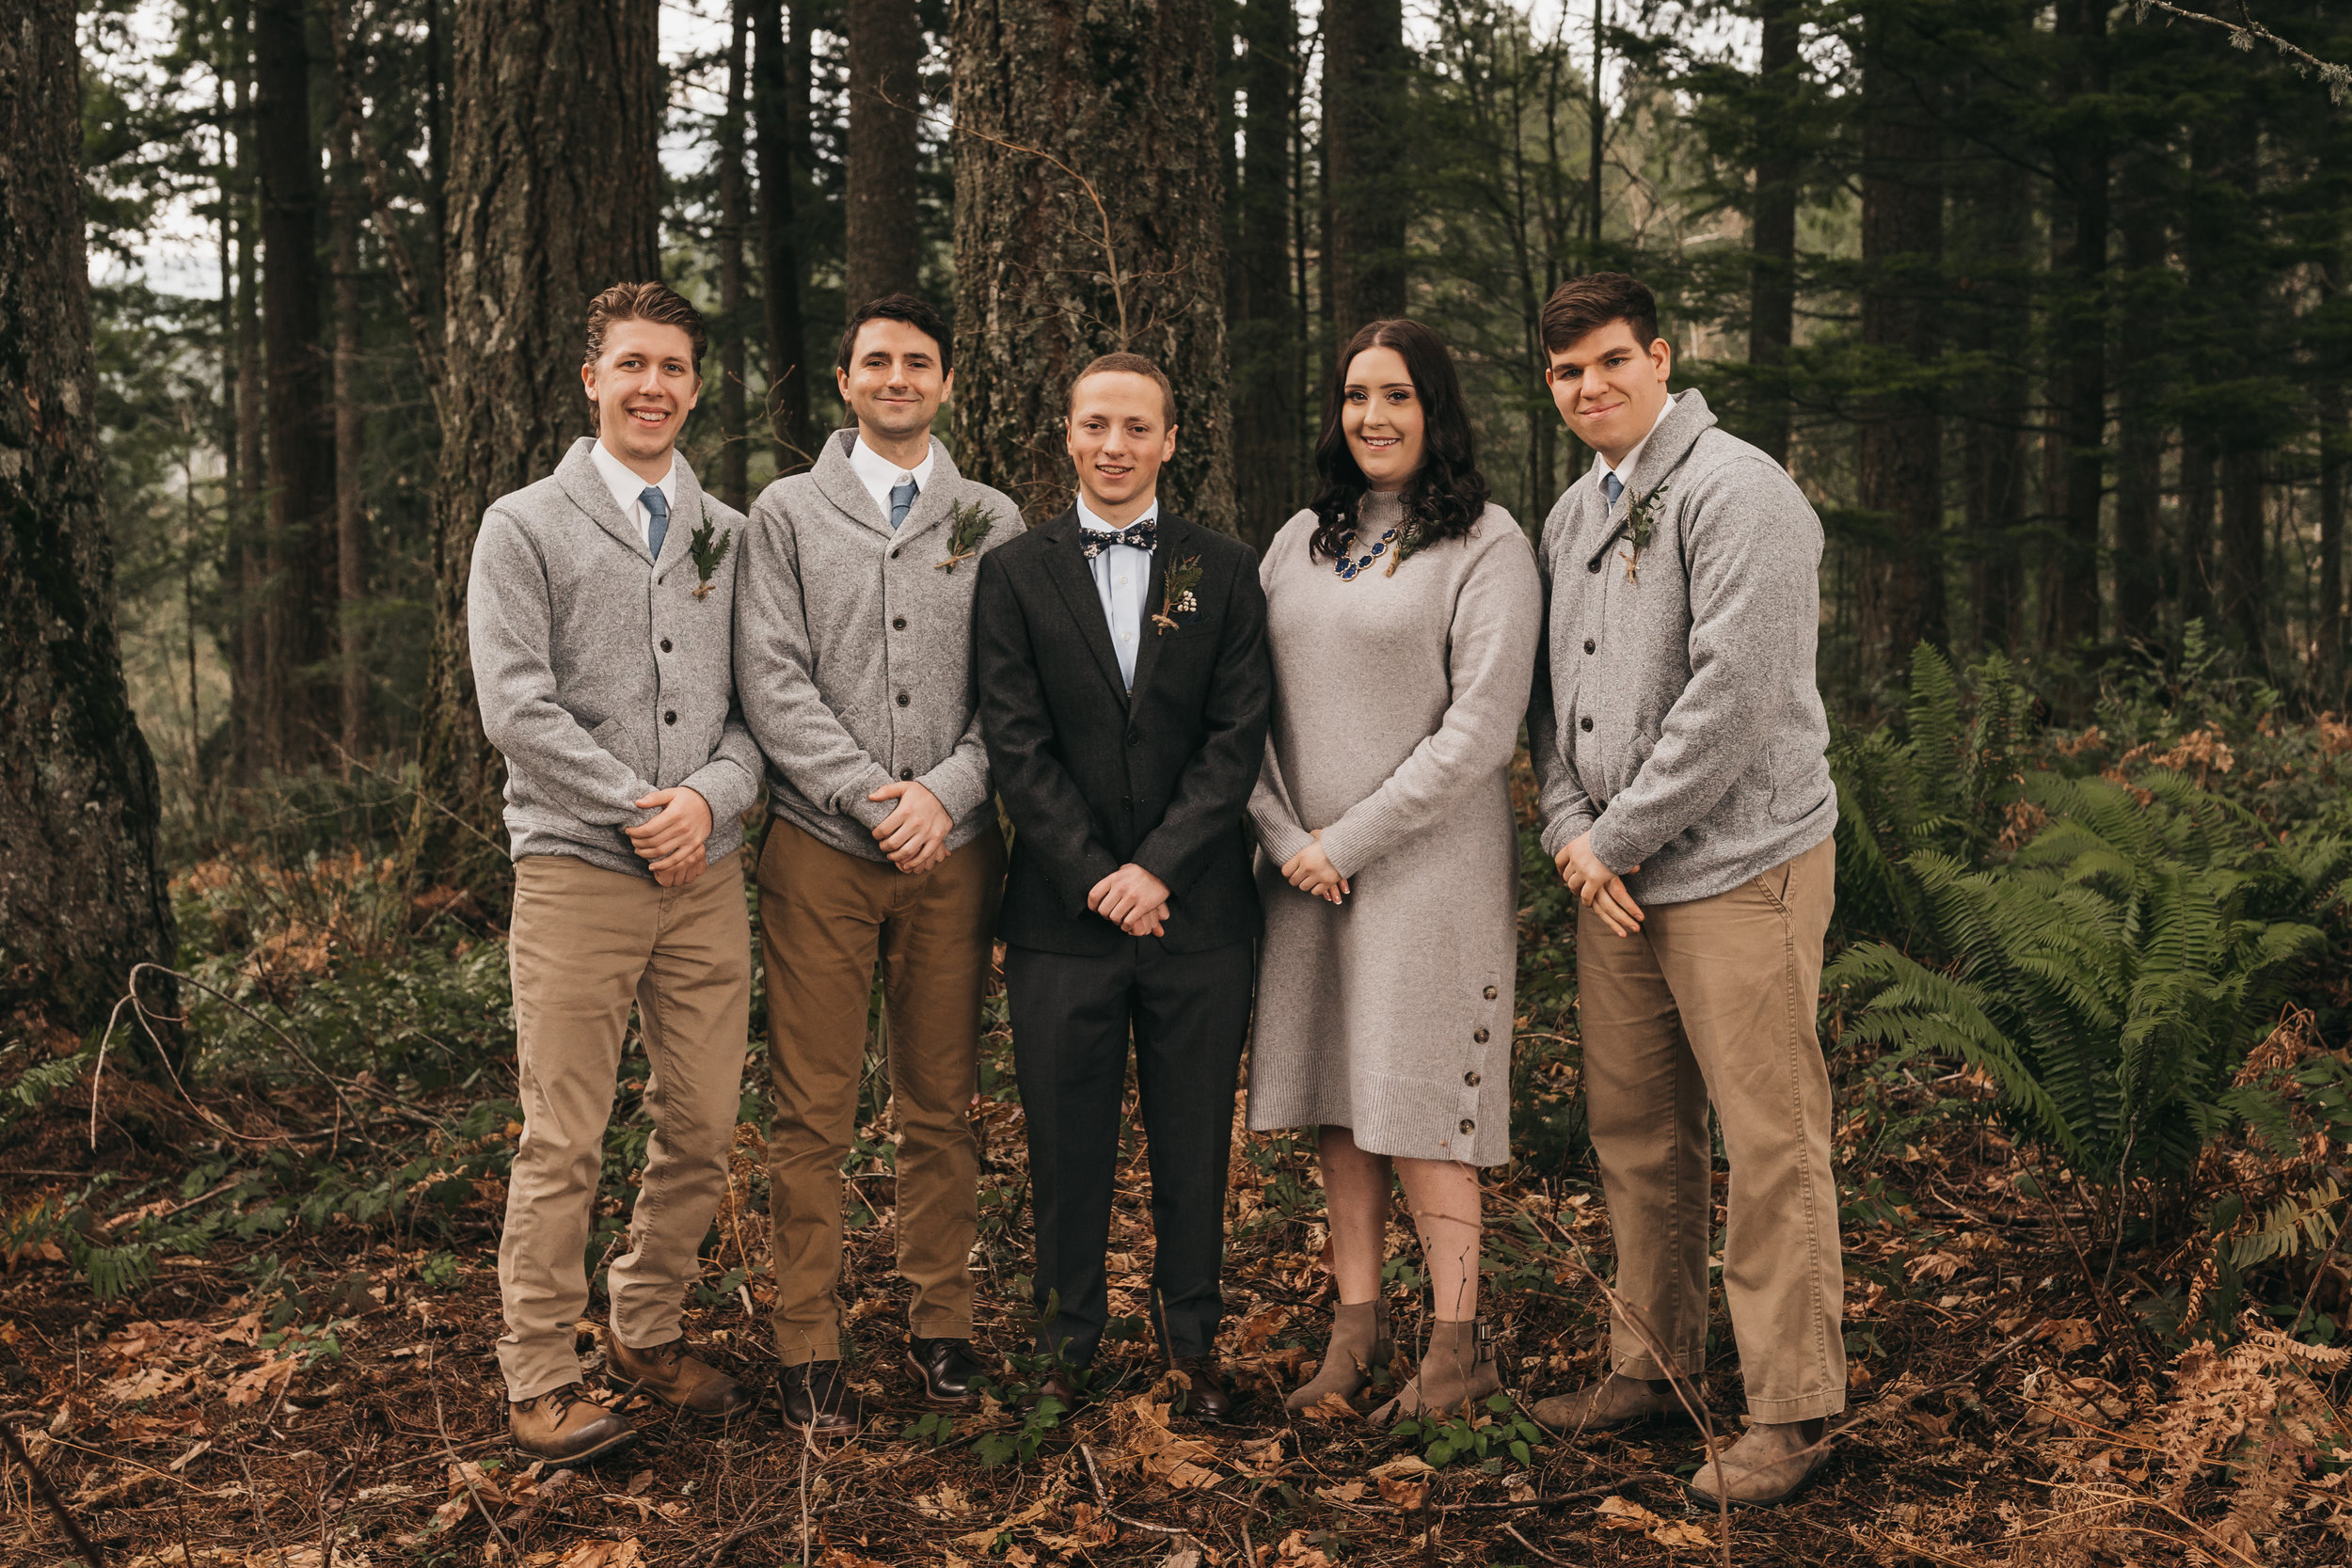 Airbnb Wedding in the Columbia River Gorge | Between the Pine Photography 